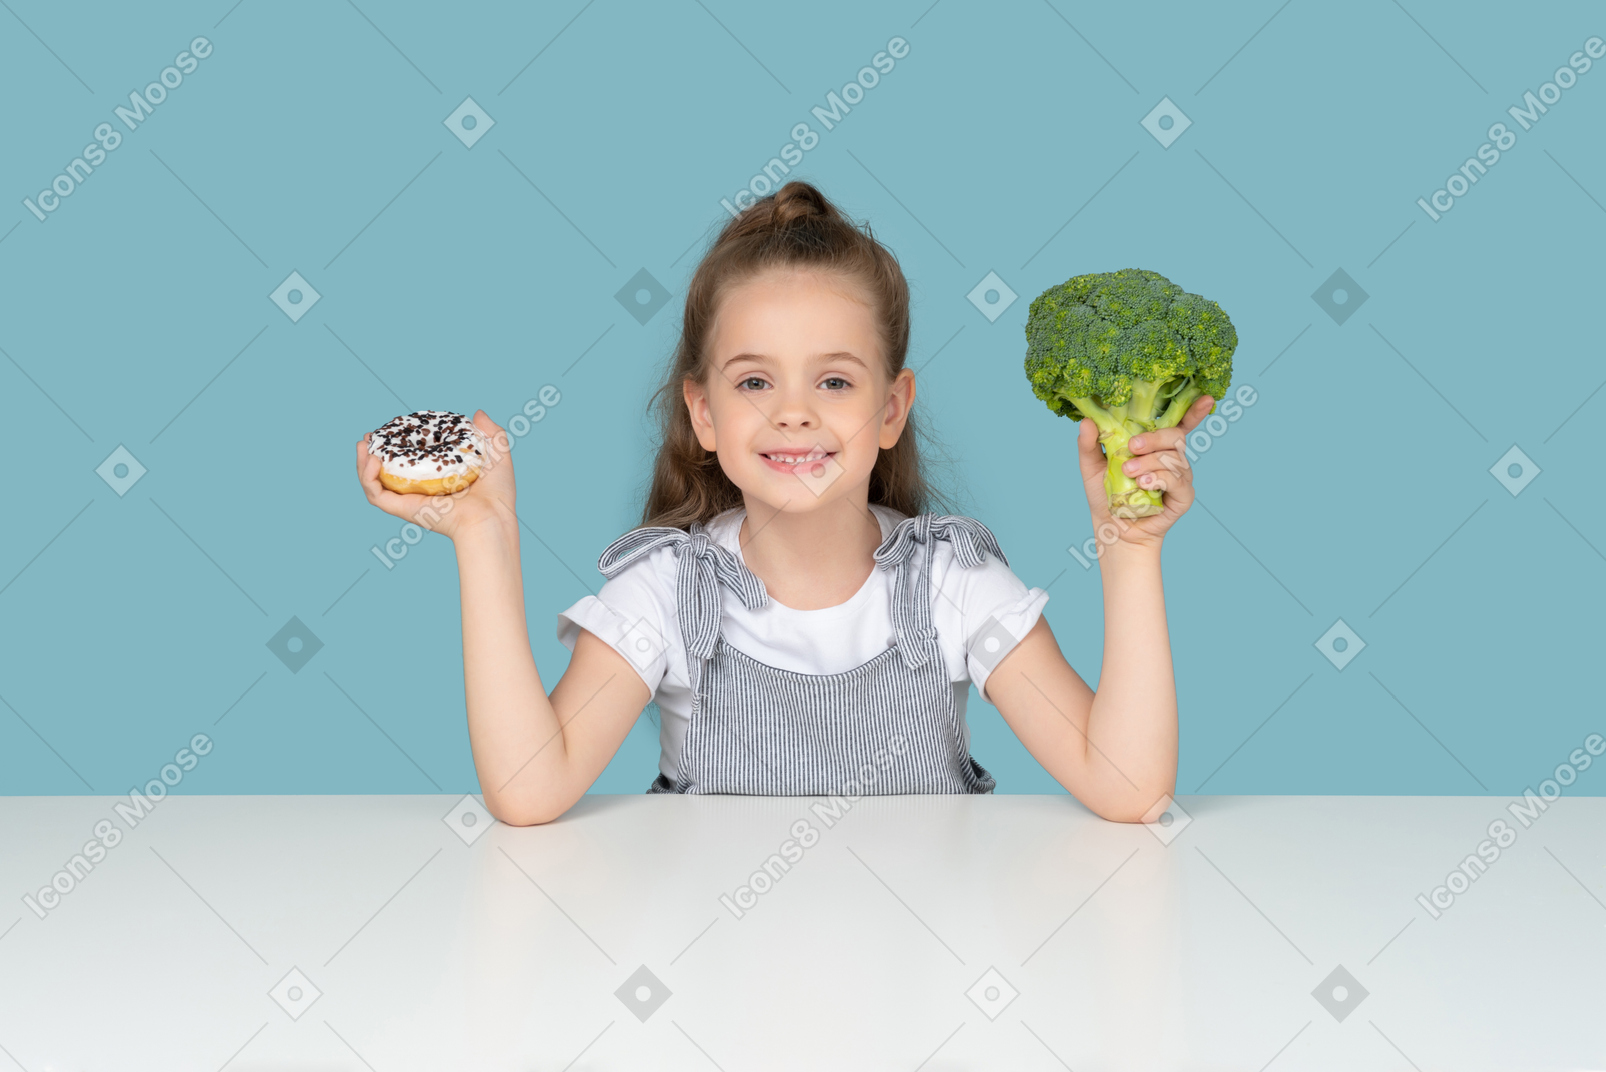 Cute little girl trying to choose between a doughnut and some broccoli